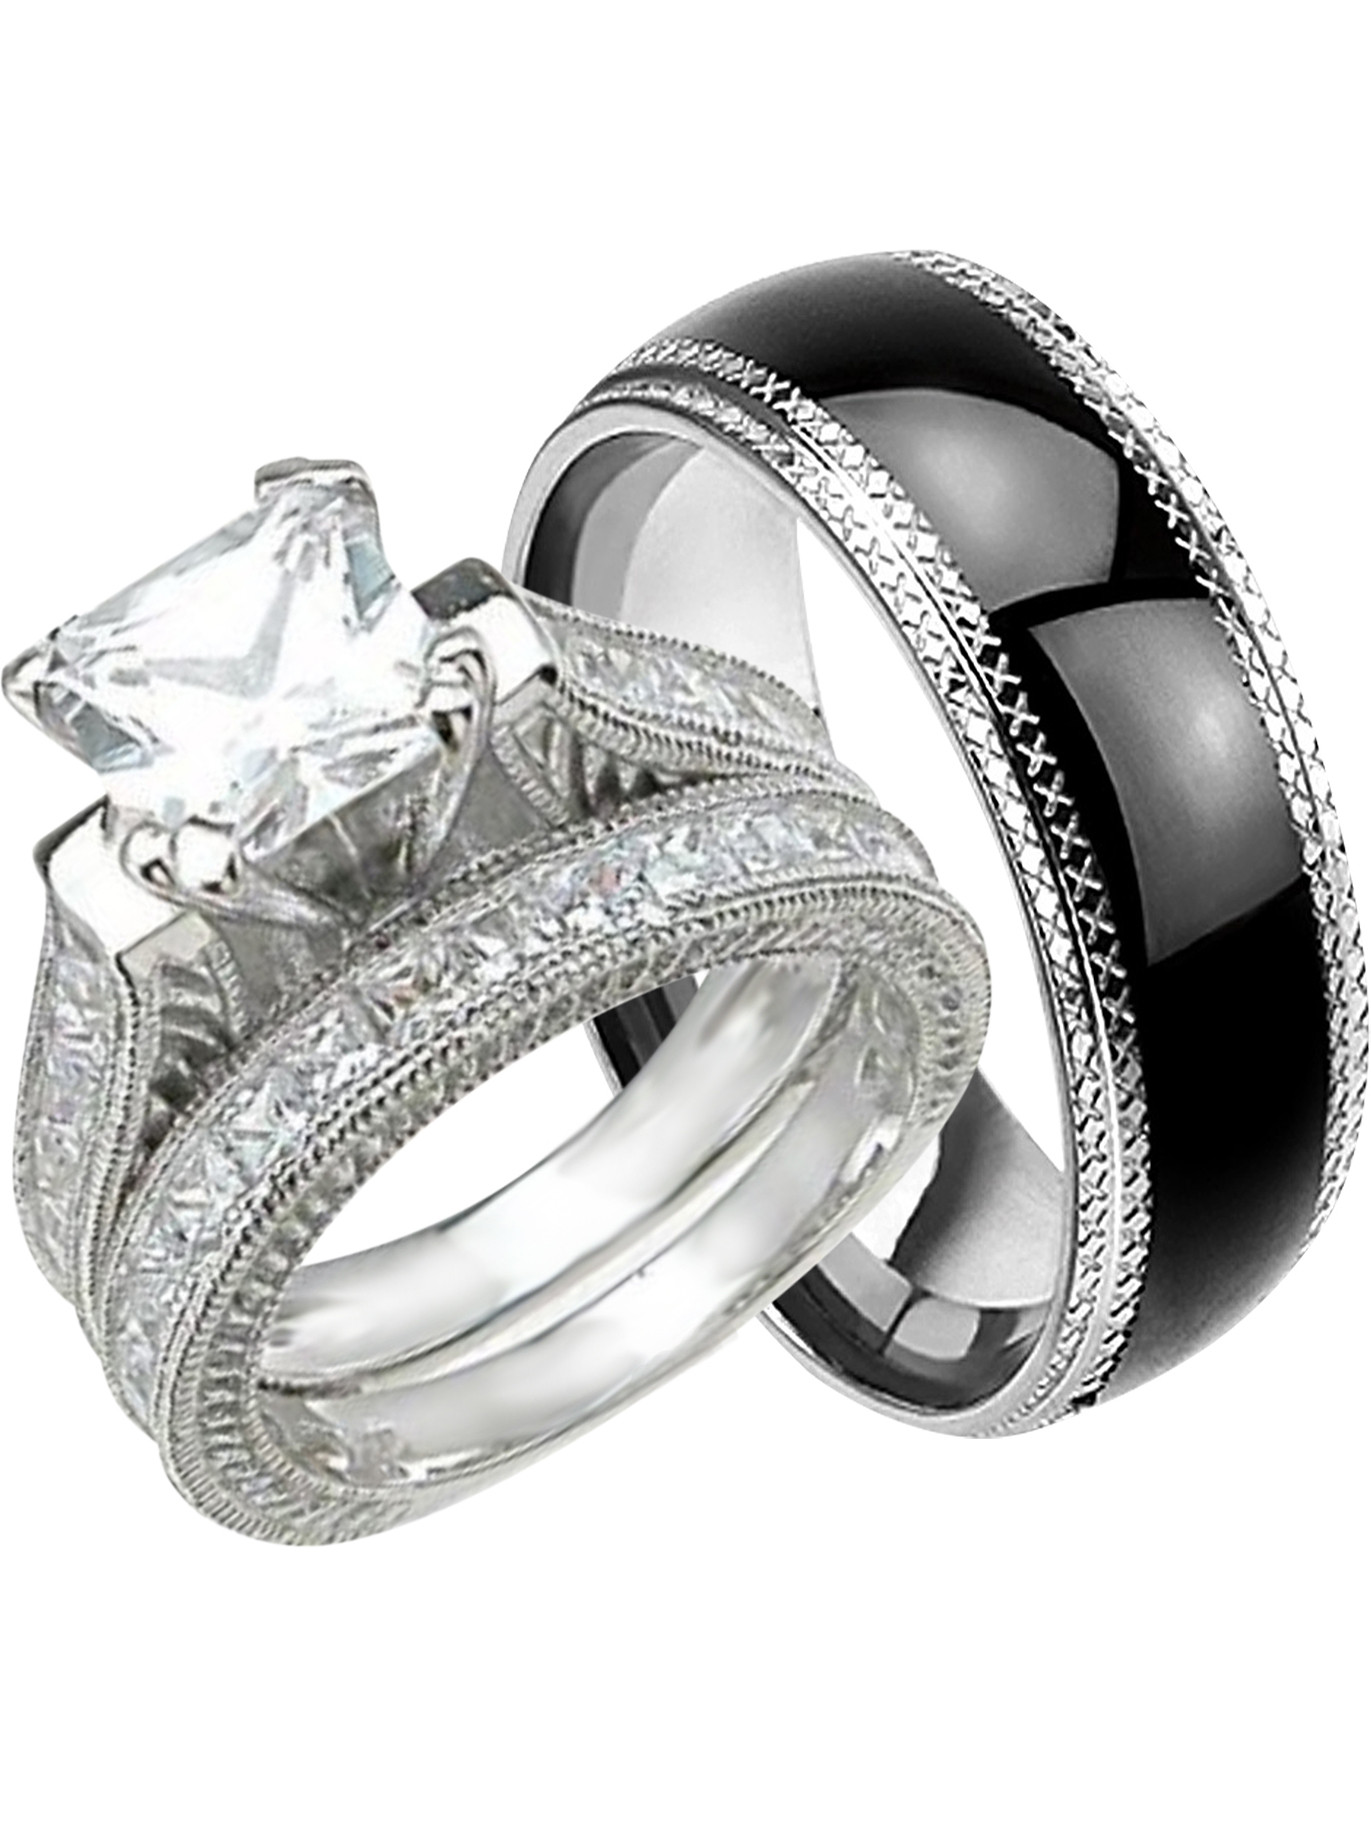 Matching Wedding Band Sets For His And Her
 LaRaso & Co His and Hers Wedding Ring Set Matching